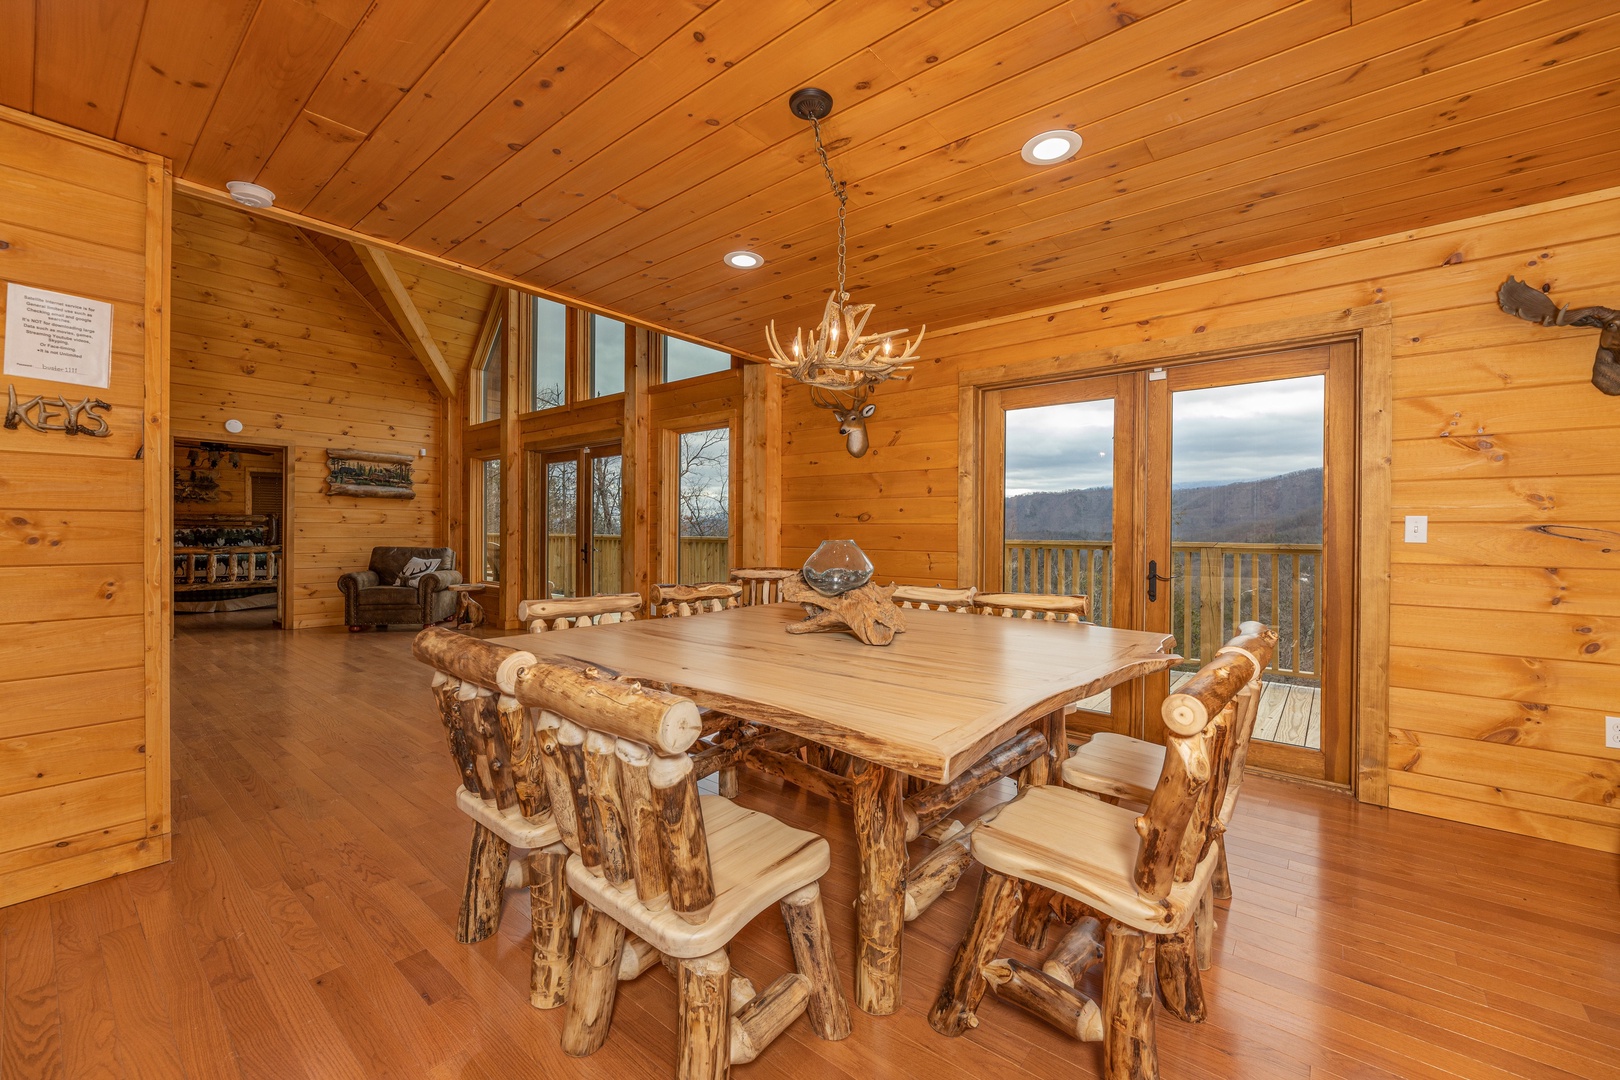 Dining room with table for 8 at J's Hideaway, a 4 bedroom cabin rental located in Pigeon Forge